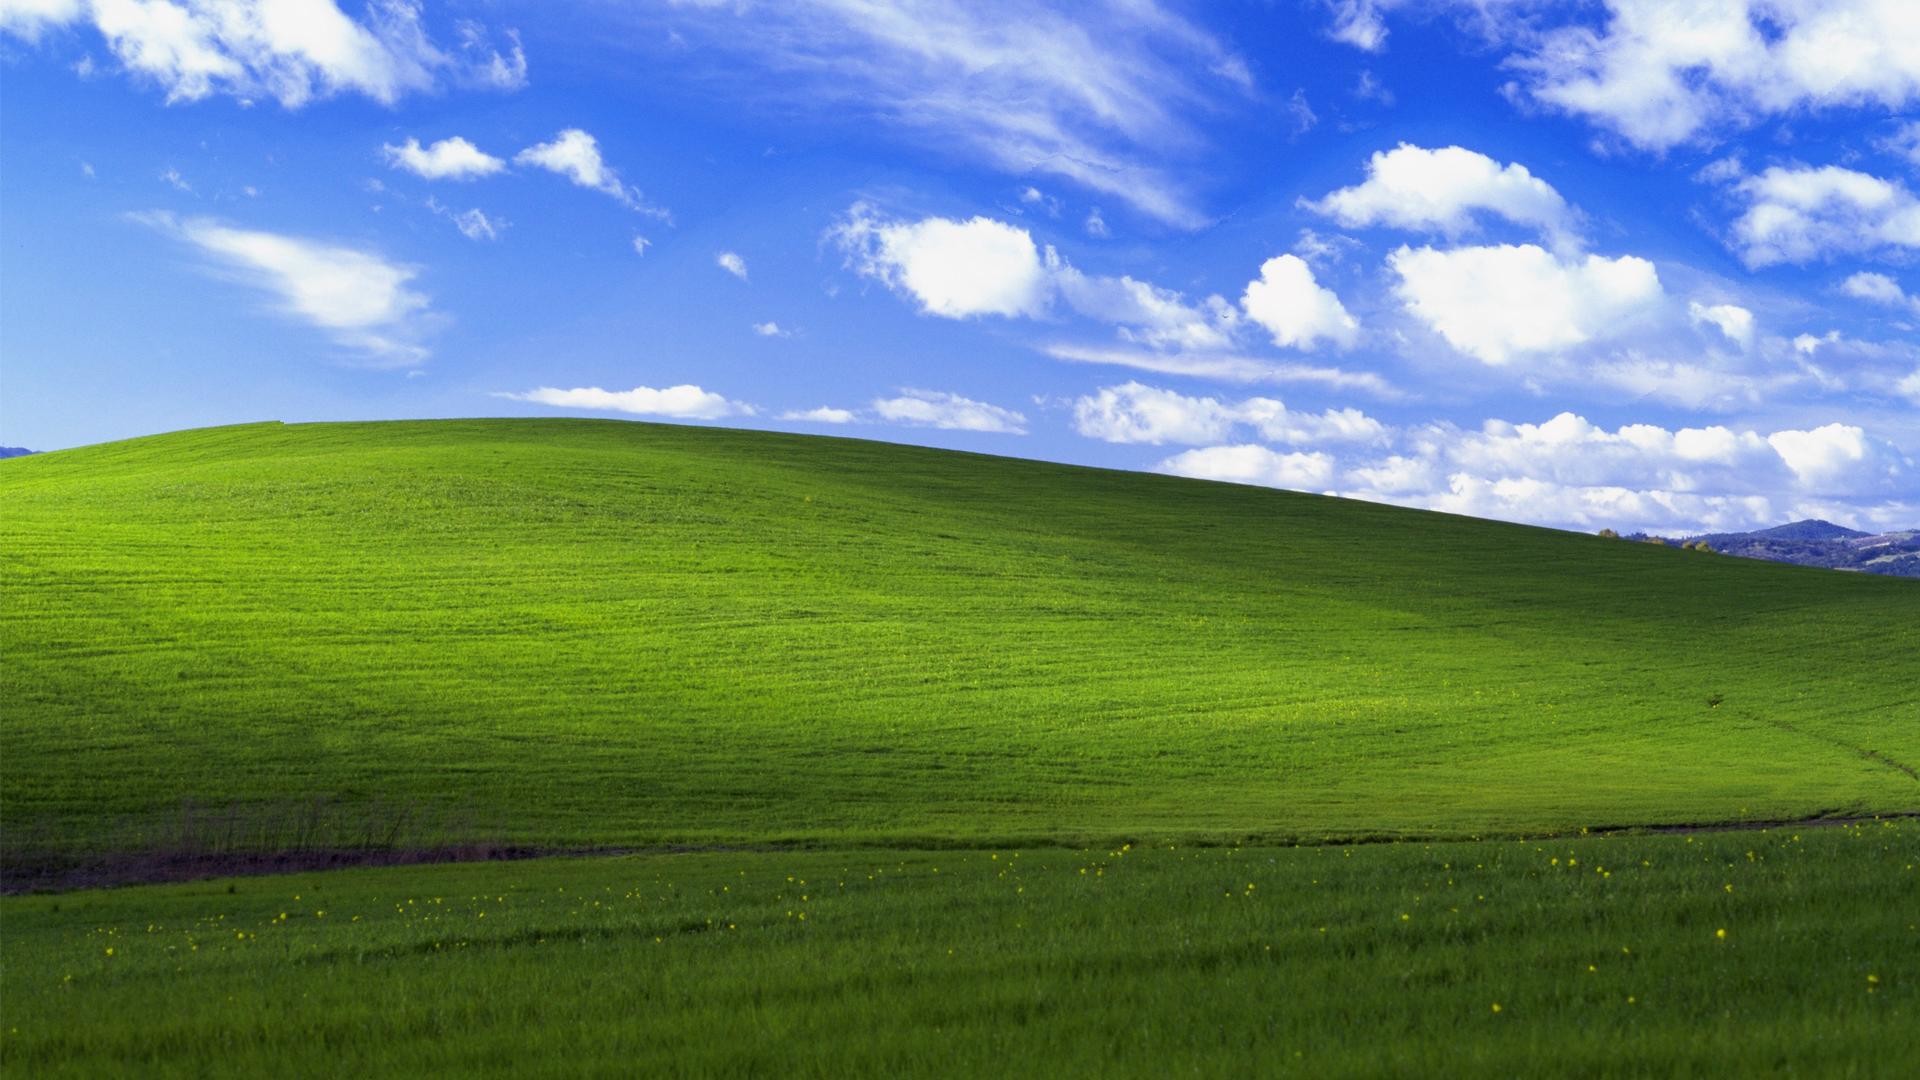 Colorful Windows Xp Background Widescreen Bliss By Charles O